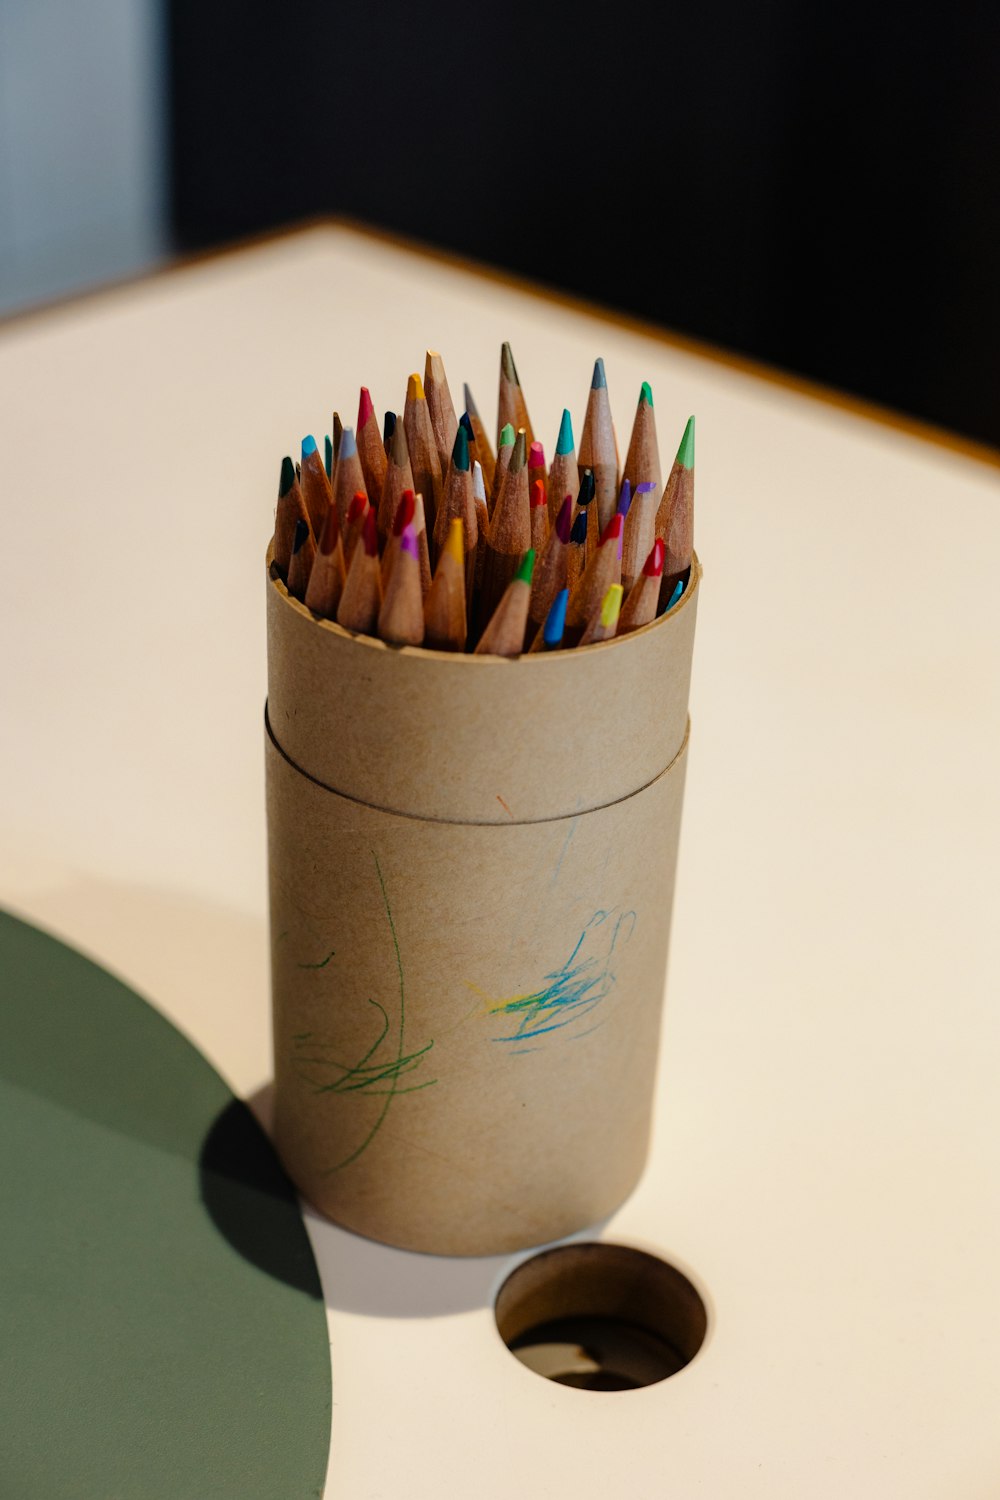 a cup full of colored pencils sitting on a table